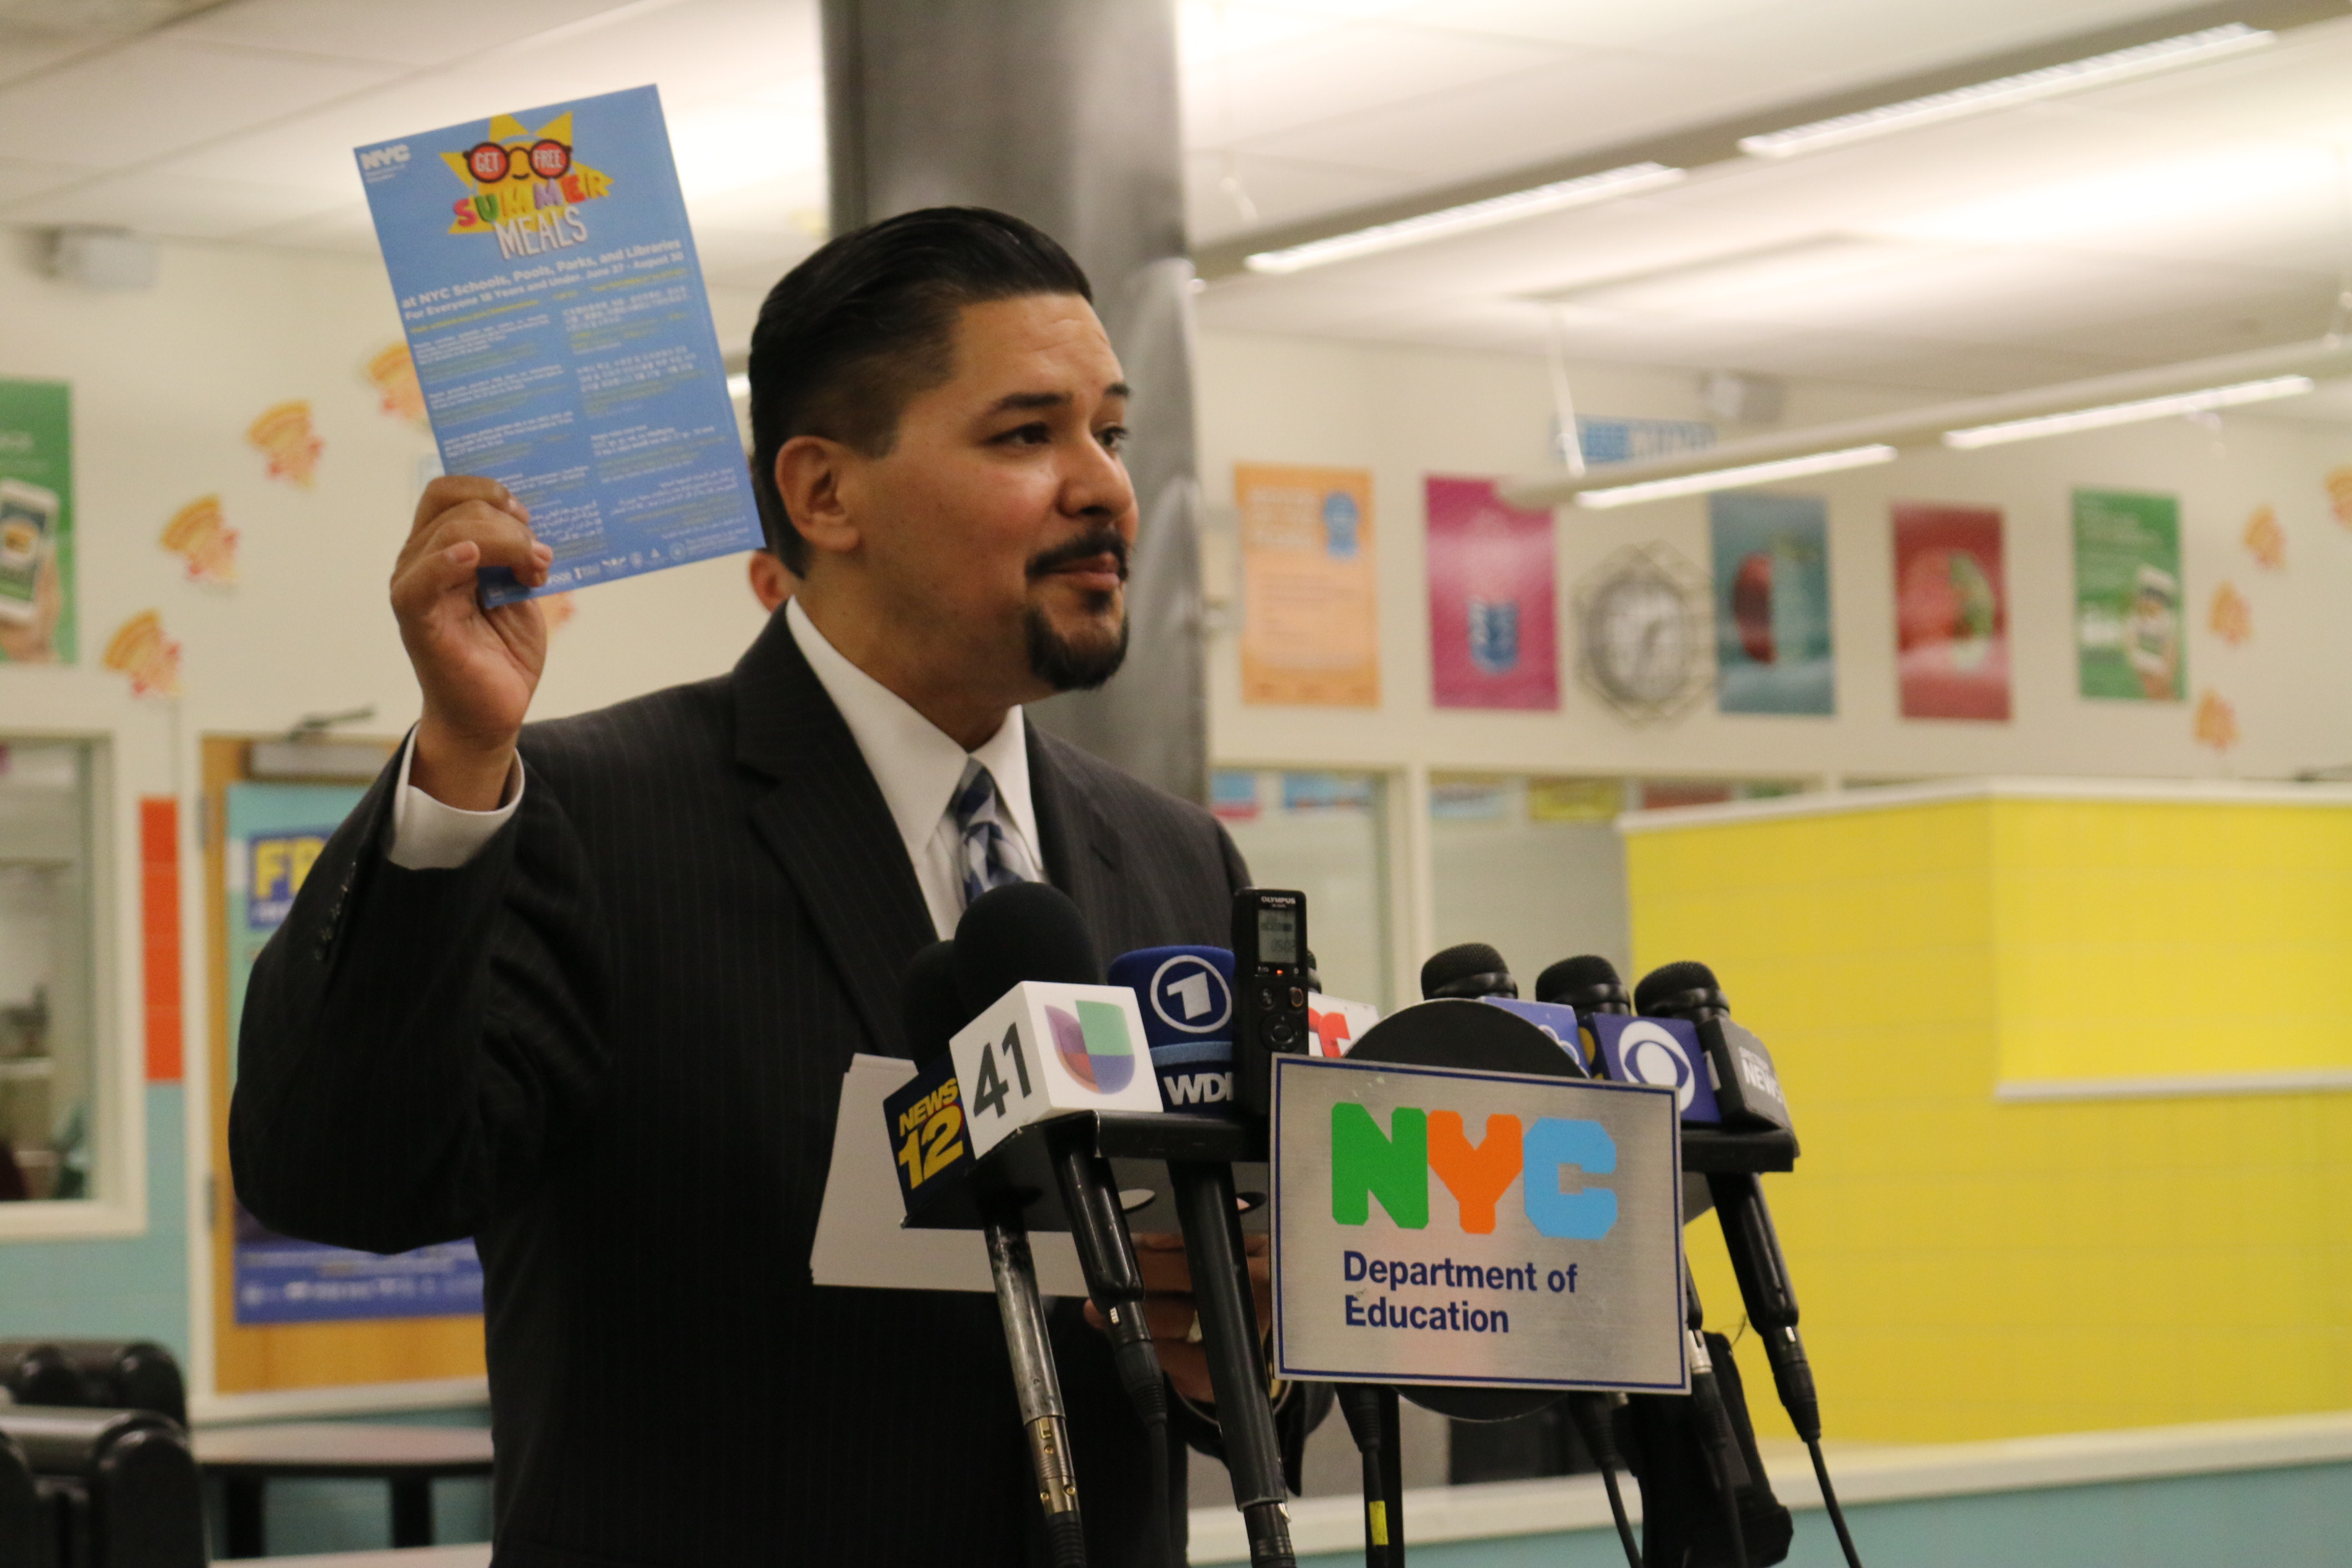 Chancellor Richard Carranza holds up a “summer meals” branded envelope at a launch event for the free summer meals program.